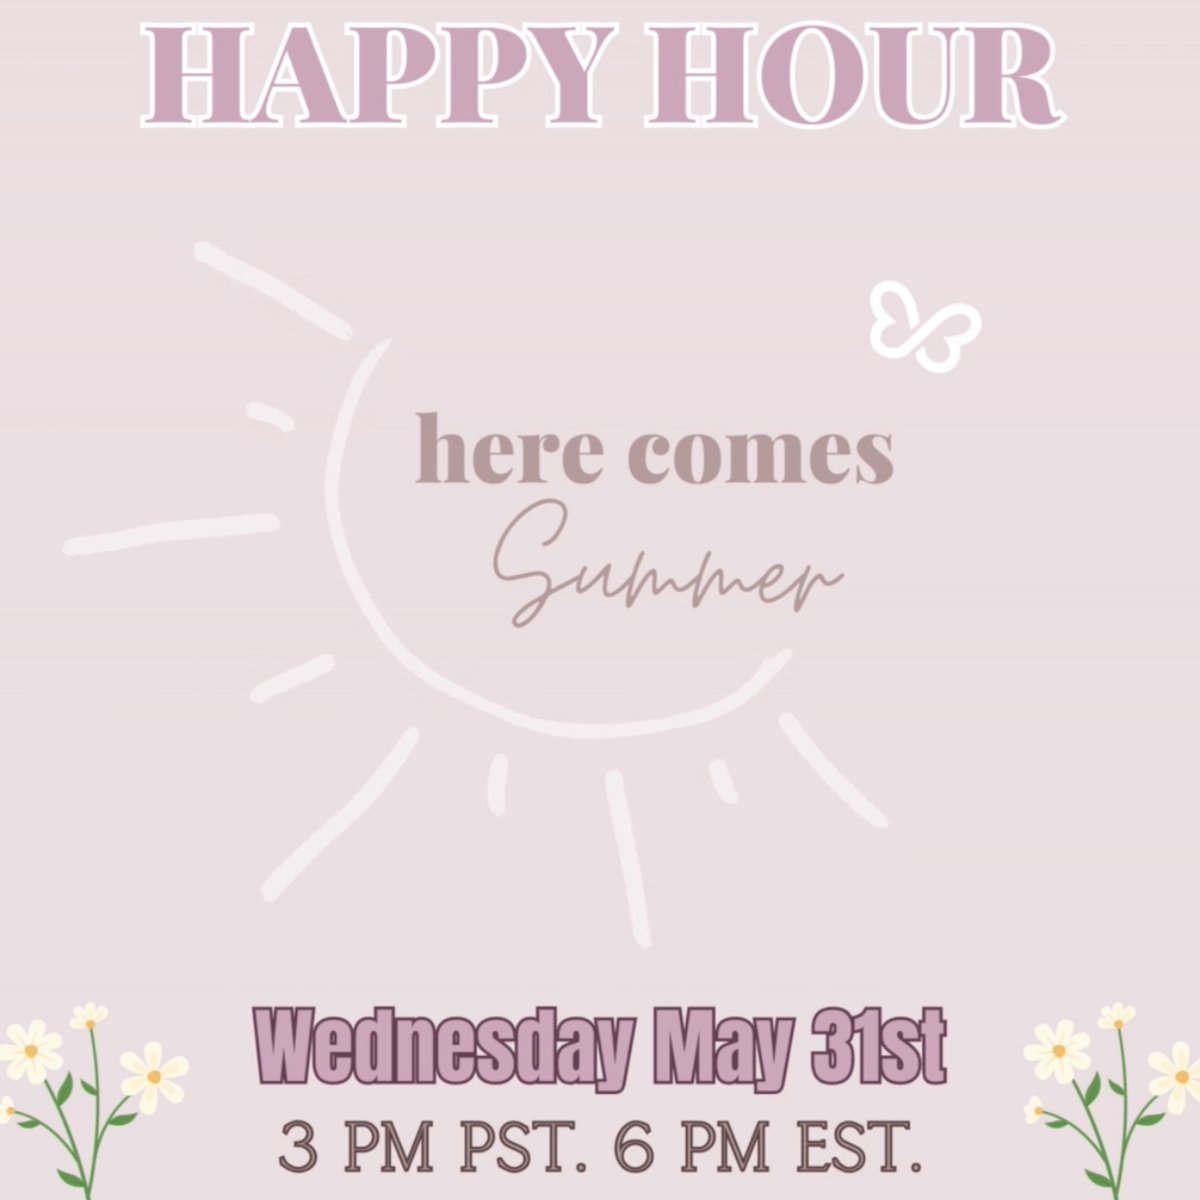 Karina is hosting happy hour today! See you there girls!

#Ivfgotthis #embryotransfer #intendedparents #surrogacy #surrogacyrocks #stickythoughts #babydust #family #ivf #fet #surrogate #babybump #bumpdate #hcg #progesterone #infertility #fertility